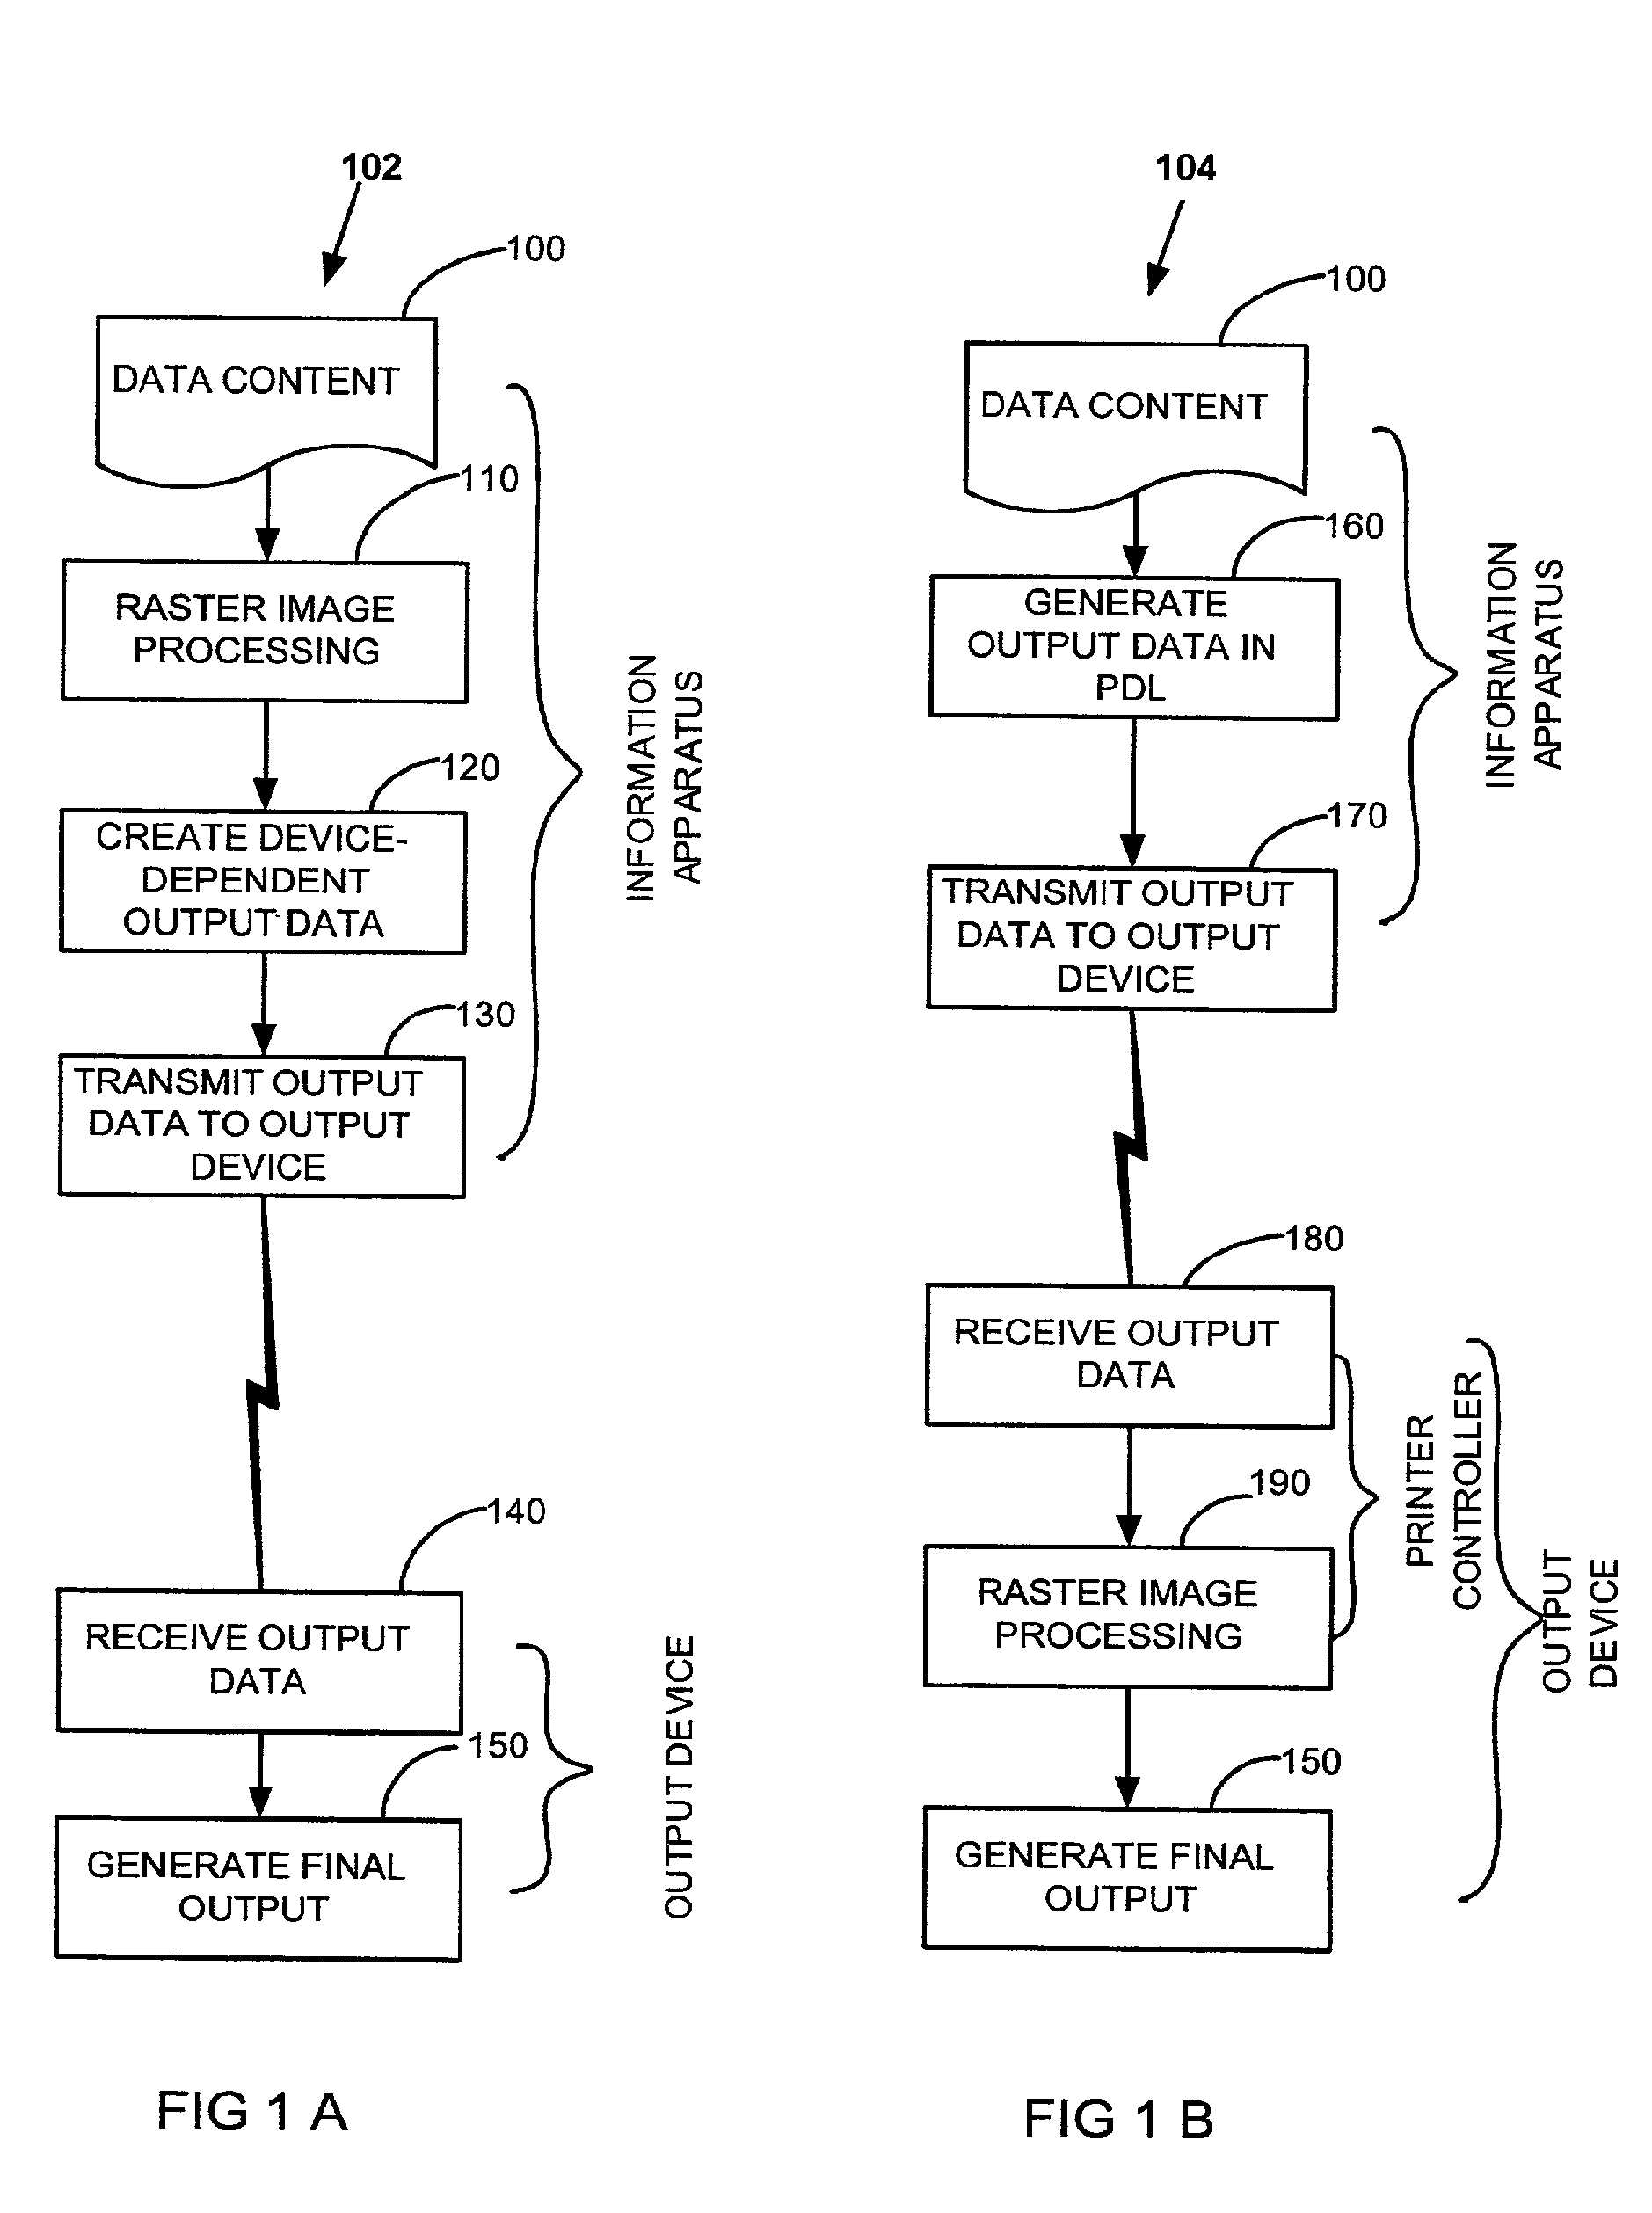 System and method for data output